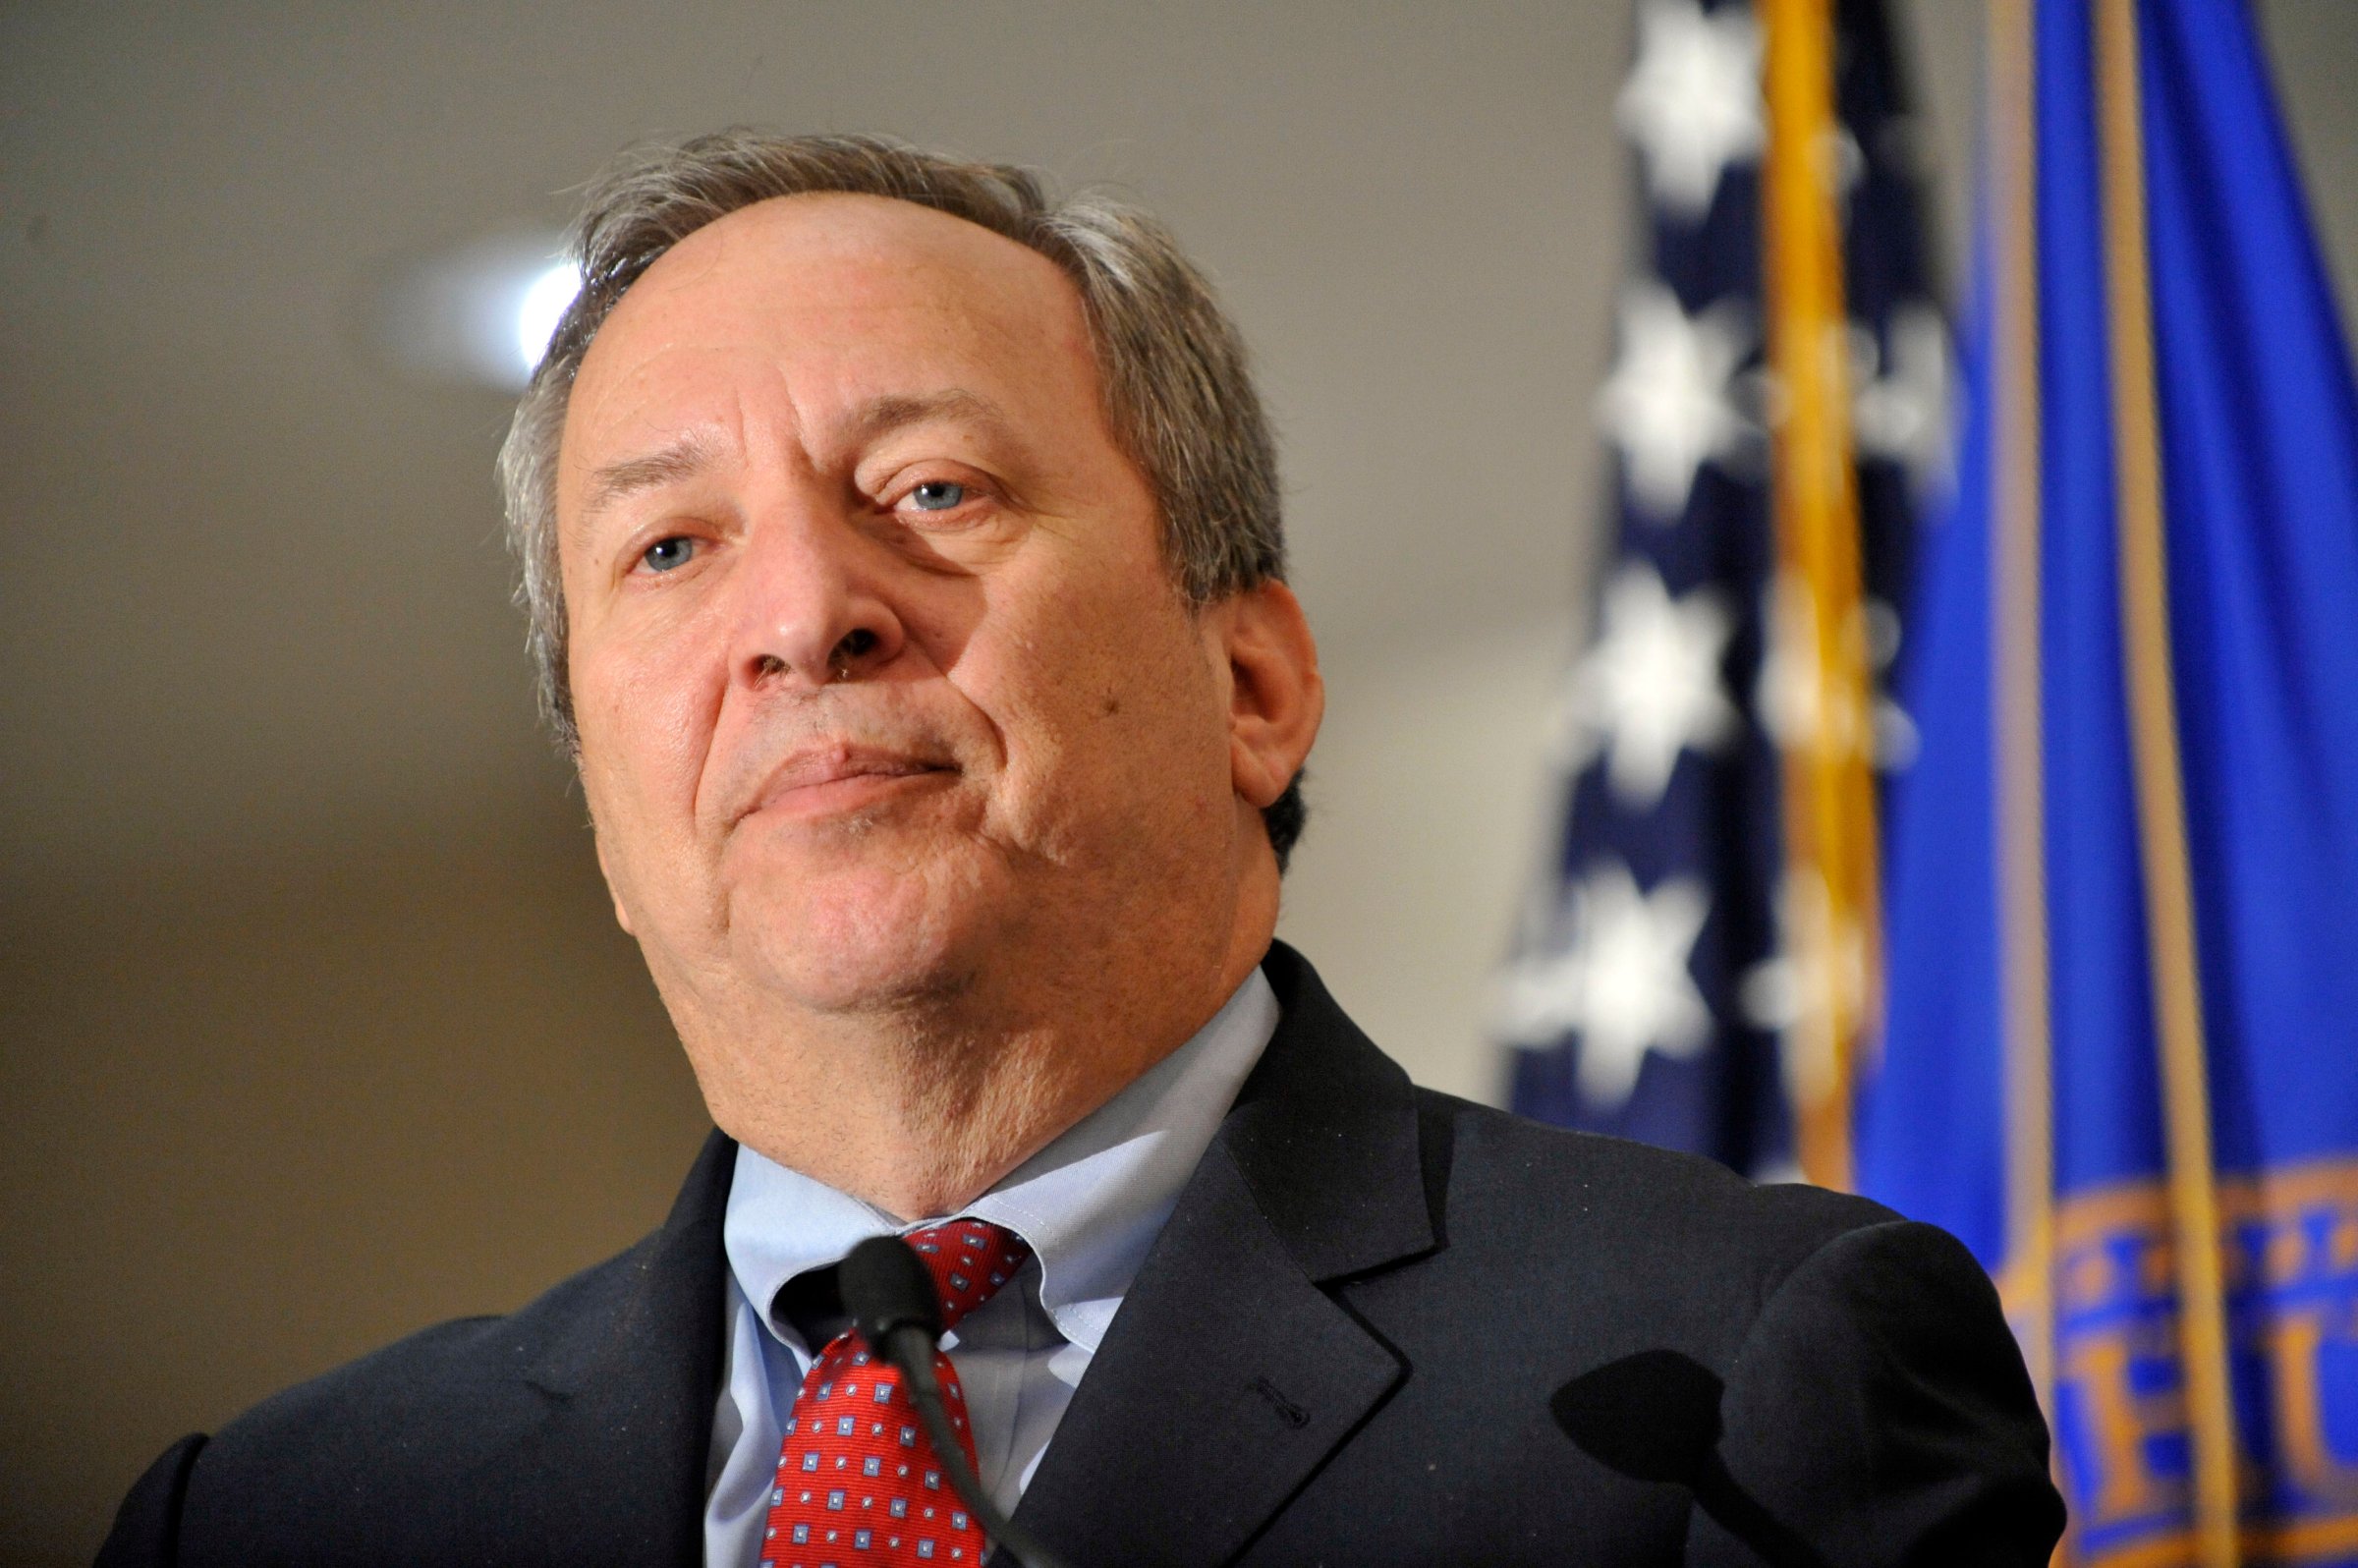 Larry Summers, an economist stepping down as down as director of President Obama's National Economic Council, speaks on increasing the use of information technology in health care in a press conference at the Department of Health and Human Services on Dec. 8, 2010.